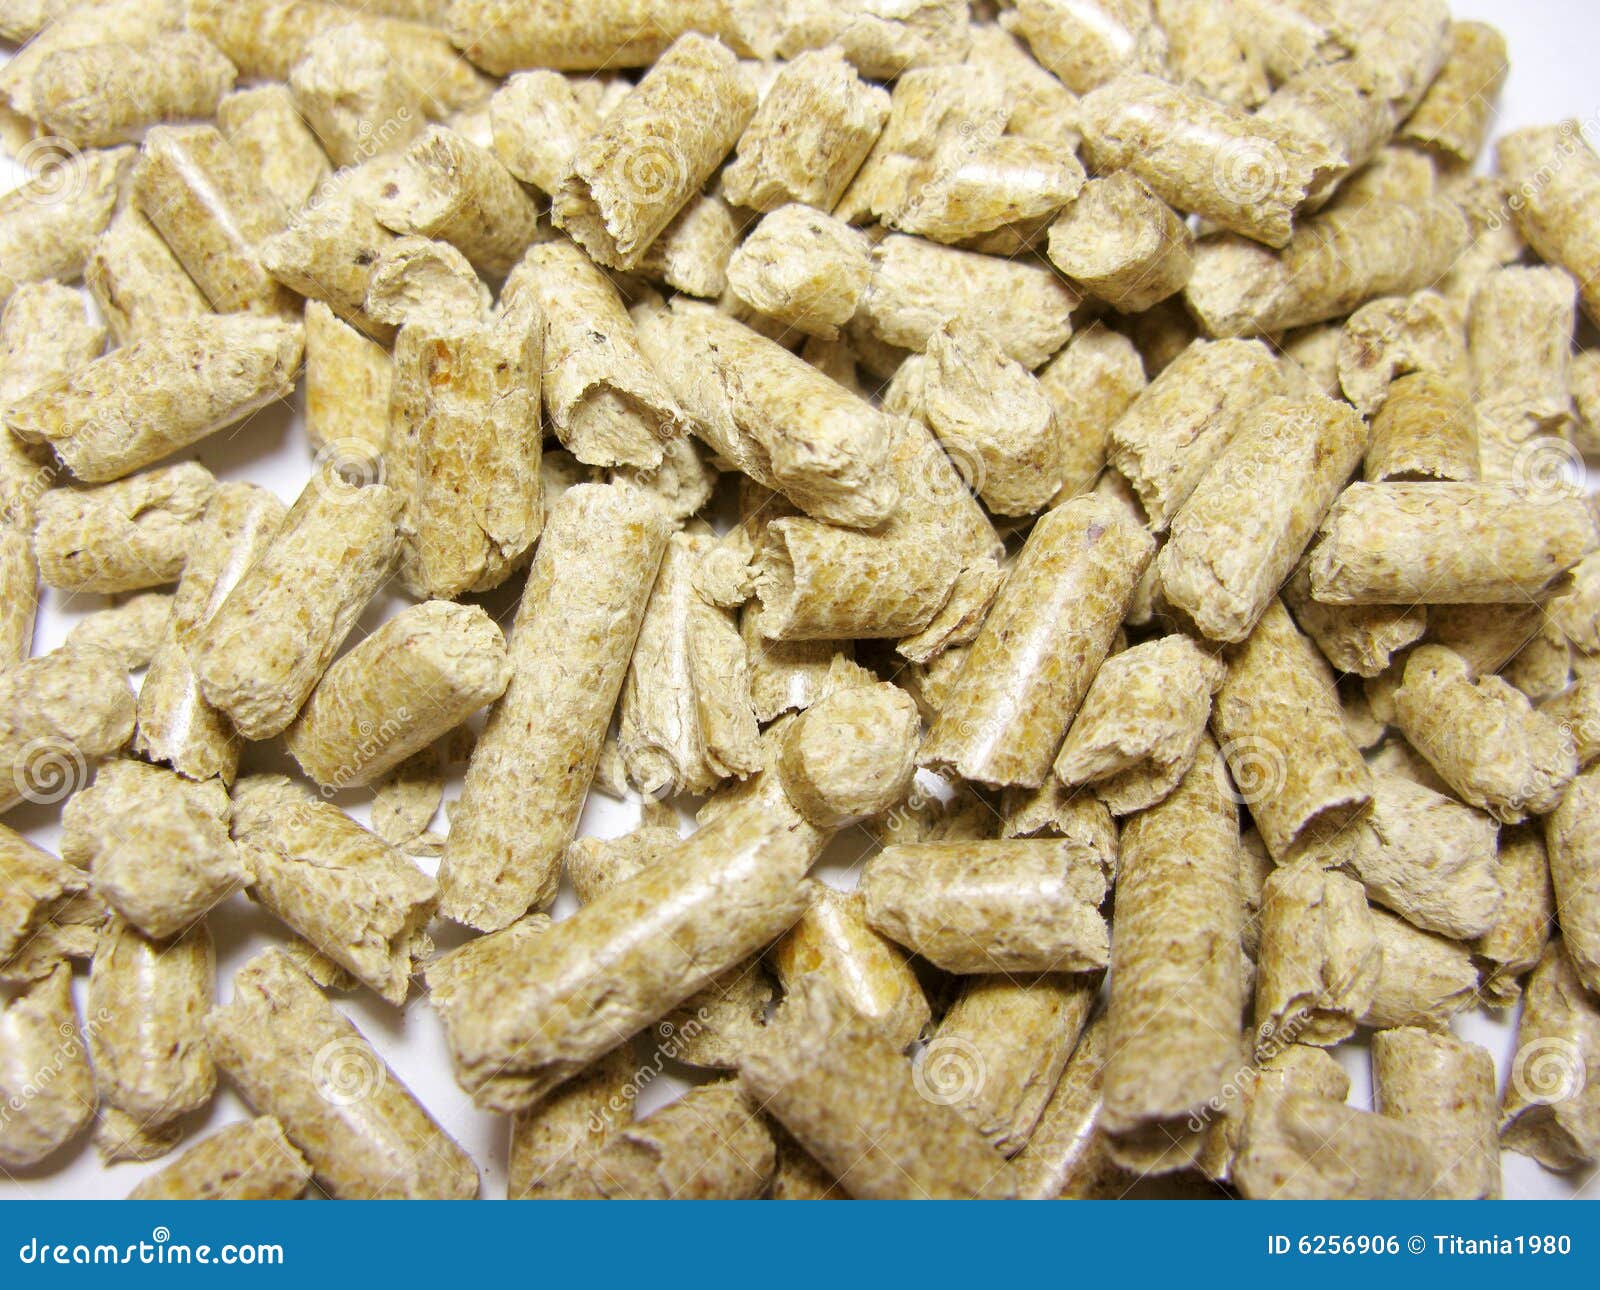 Wood pellets made from compressed combustible sawdust. Used as a 